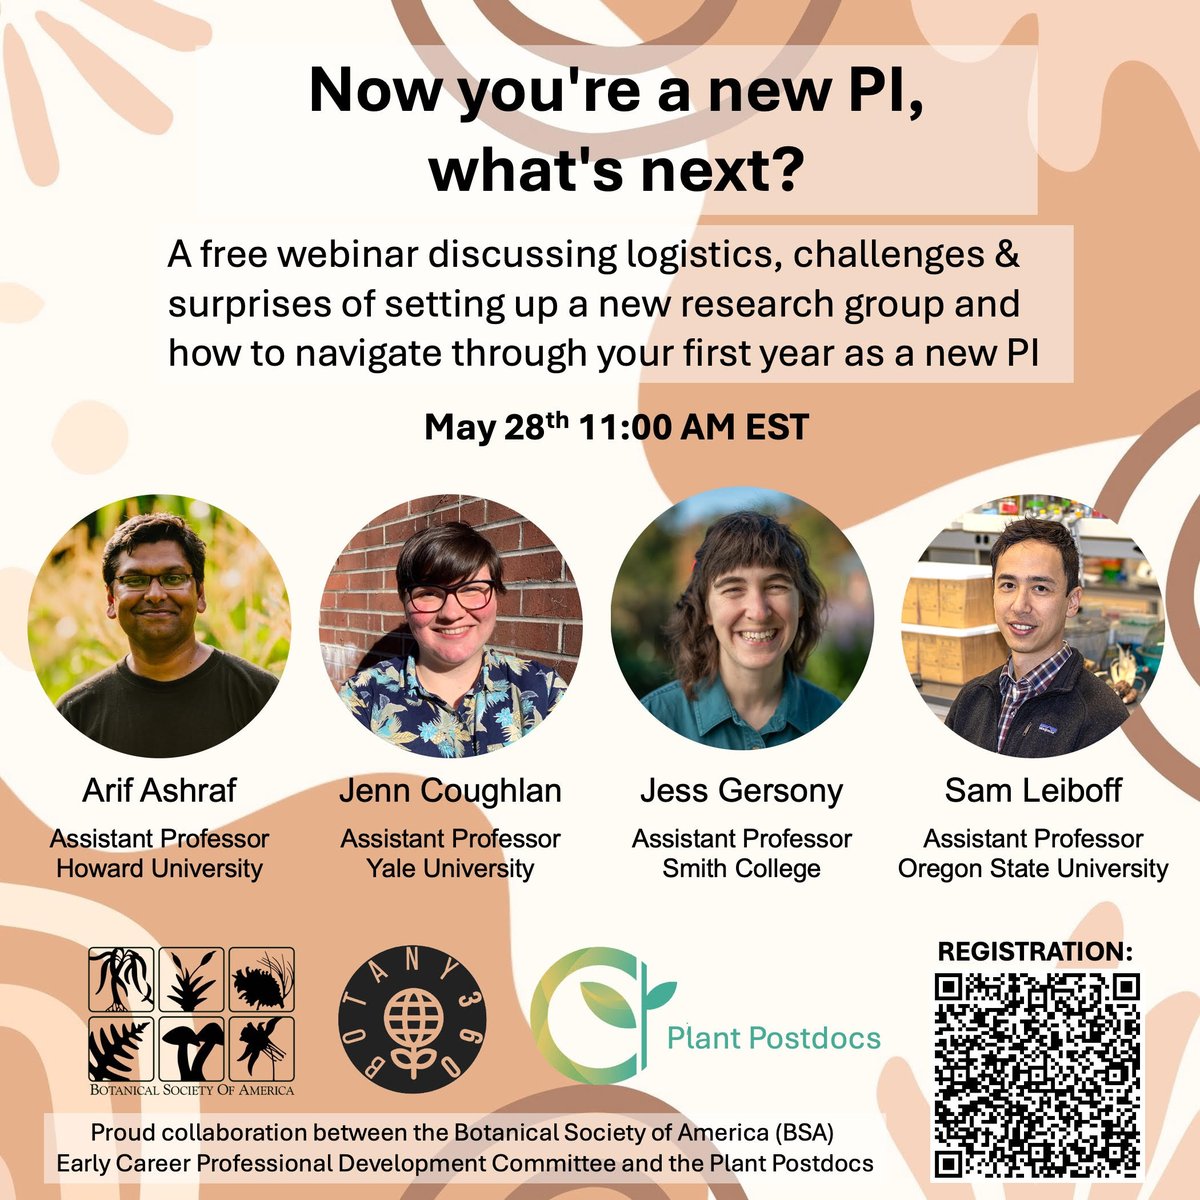 Join us for a look at the logistics, challenges, and surprises of being a new PI at this upcoming #Botany360 that will take place on May 28, 11 am EST. To learn more, and to register, visit: botany.org/calendar/displ… #BSAevents #BSAEarlyCareerProfessionals #BSAmembers #PlantJoy